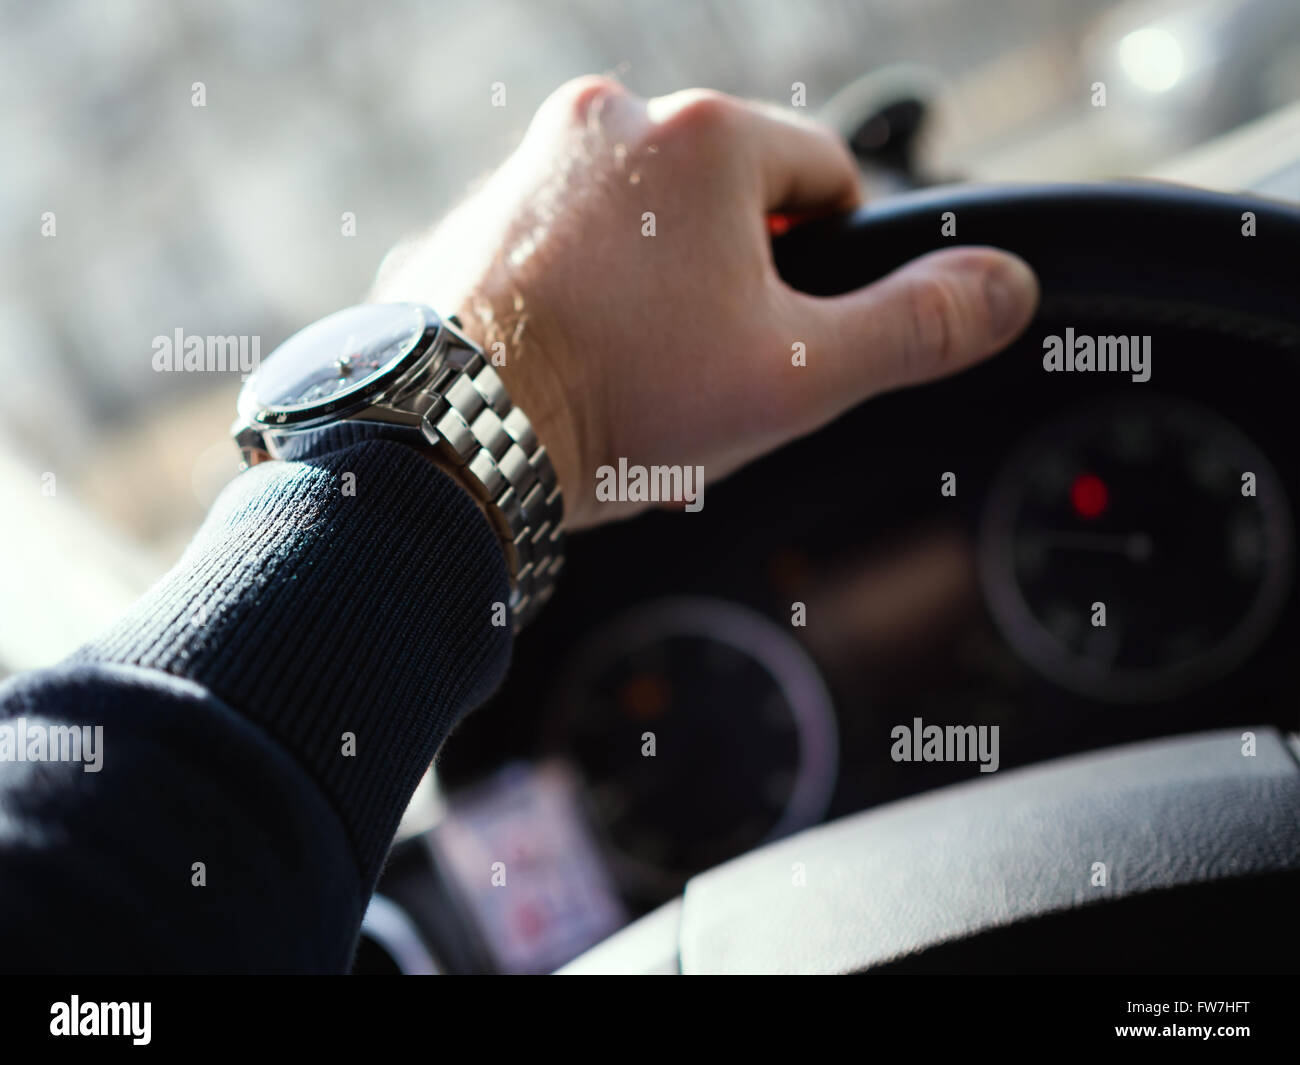 Close-up of man's hand on steering wheel. Shallow depth of field. Stock Photo